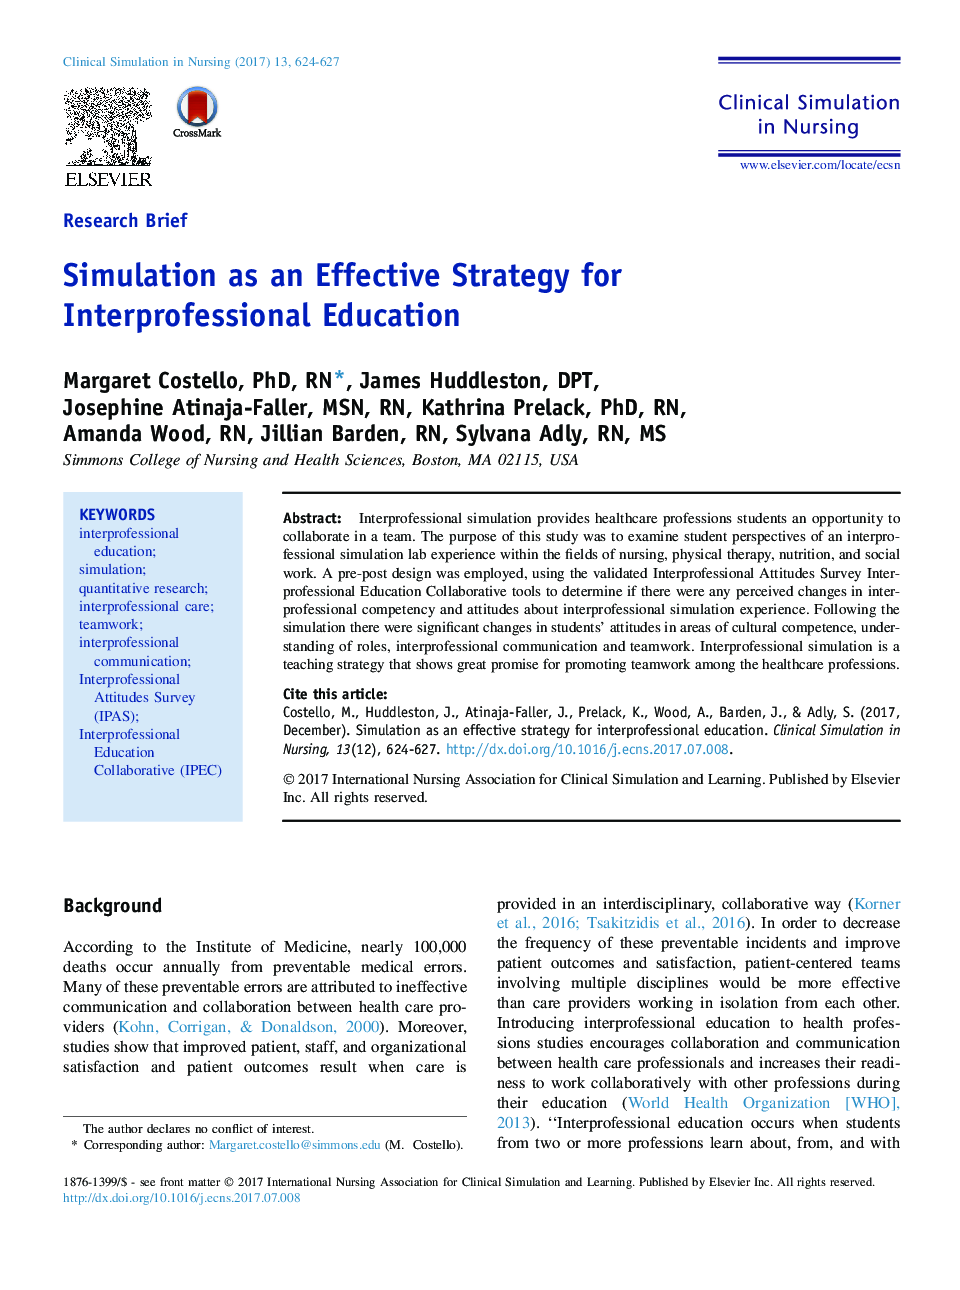 Simulation as an Effective Strategy for Interprofessional Education